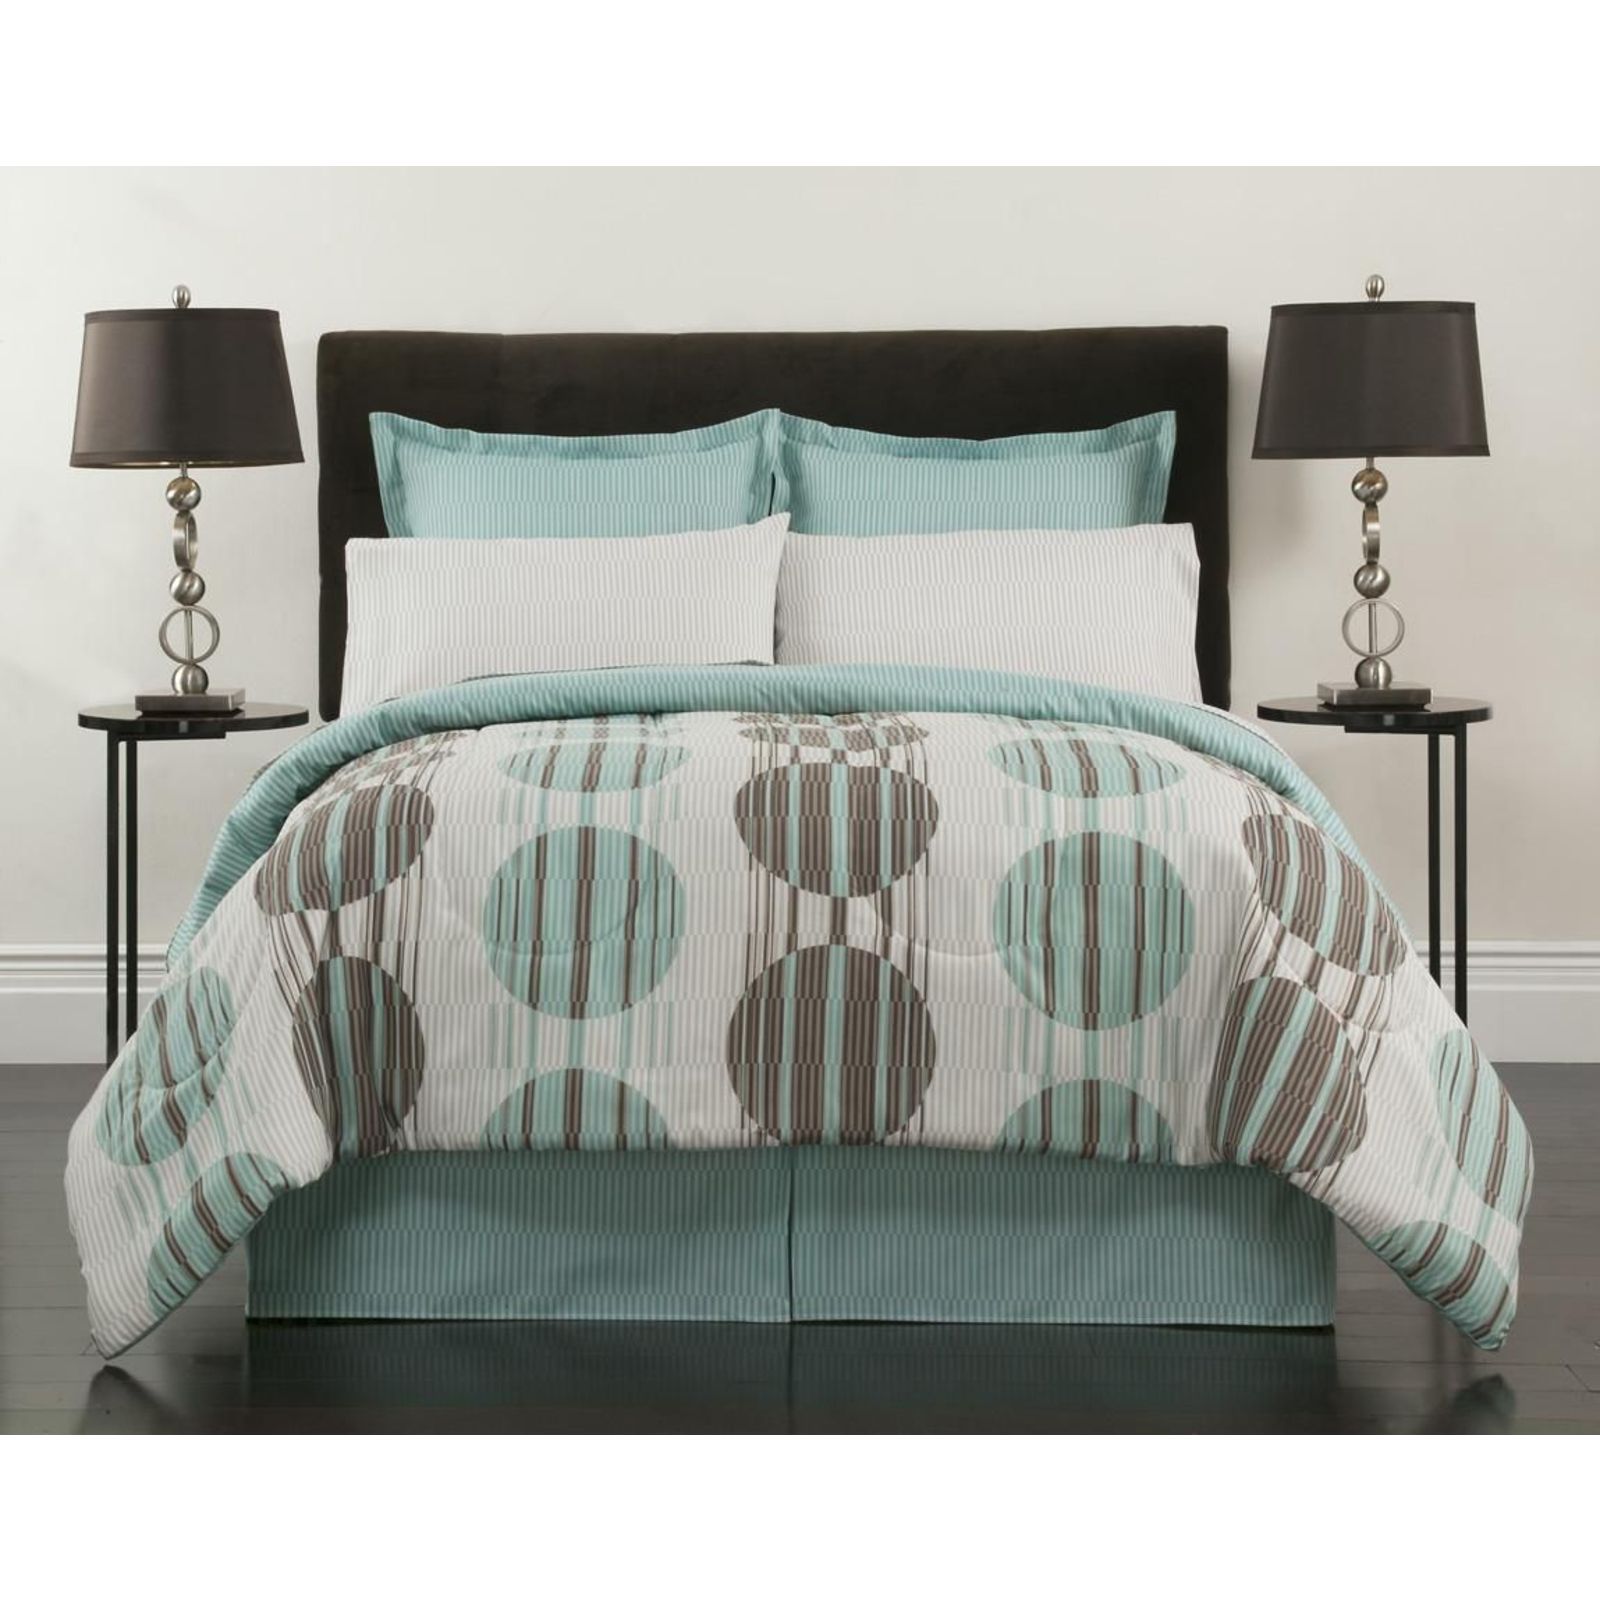 Colormate Complete Bed Set - Coolidge